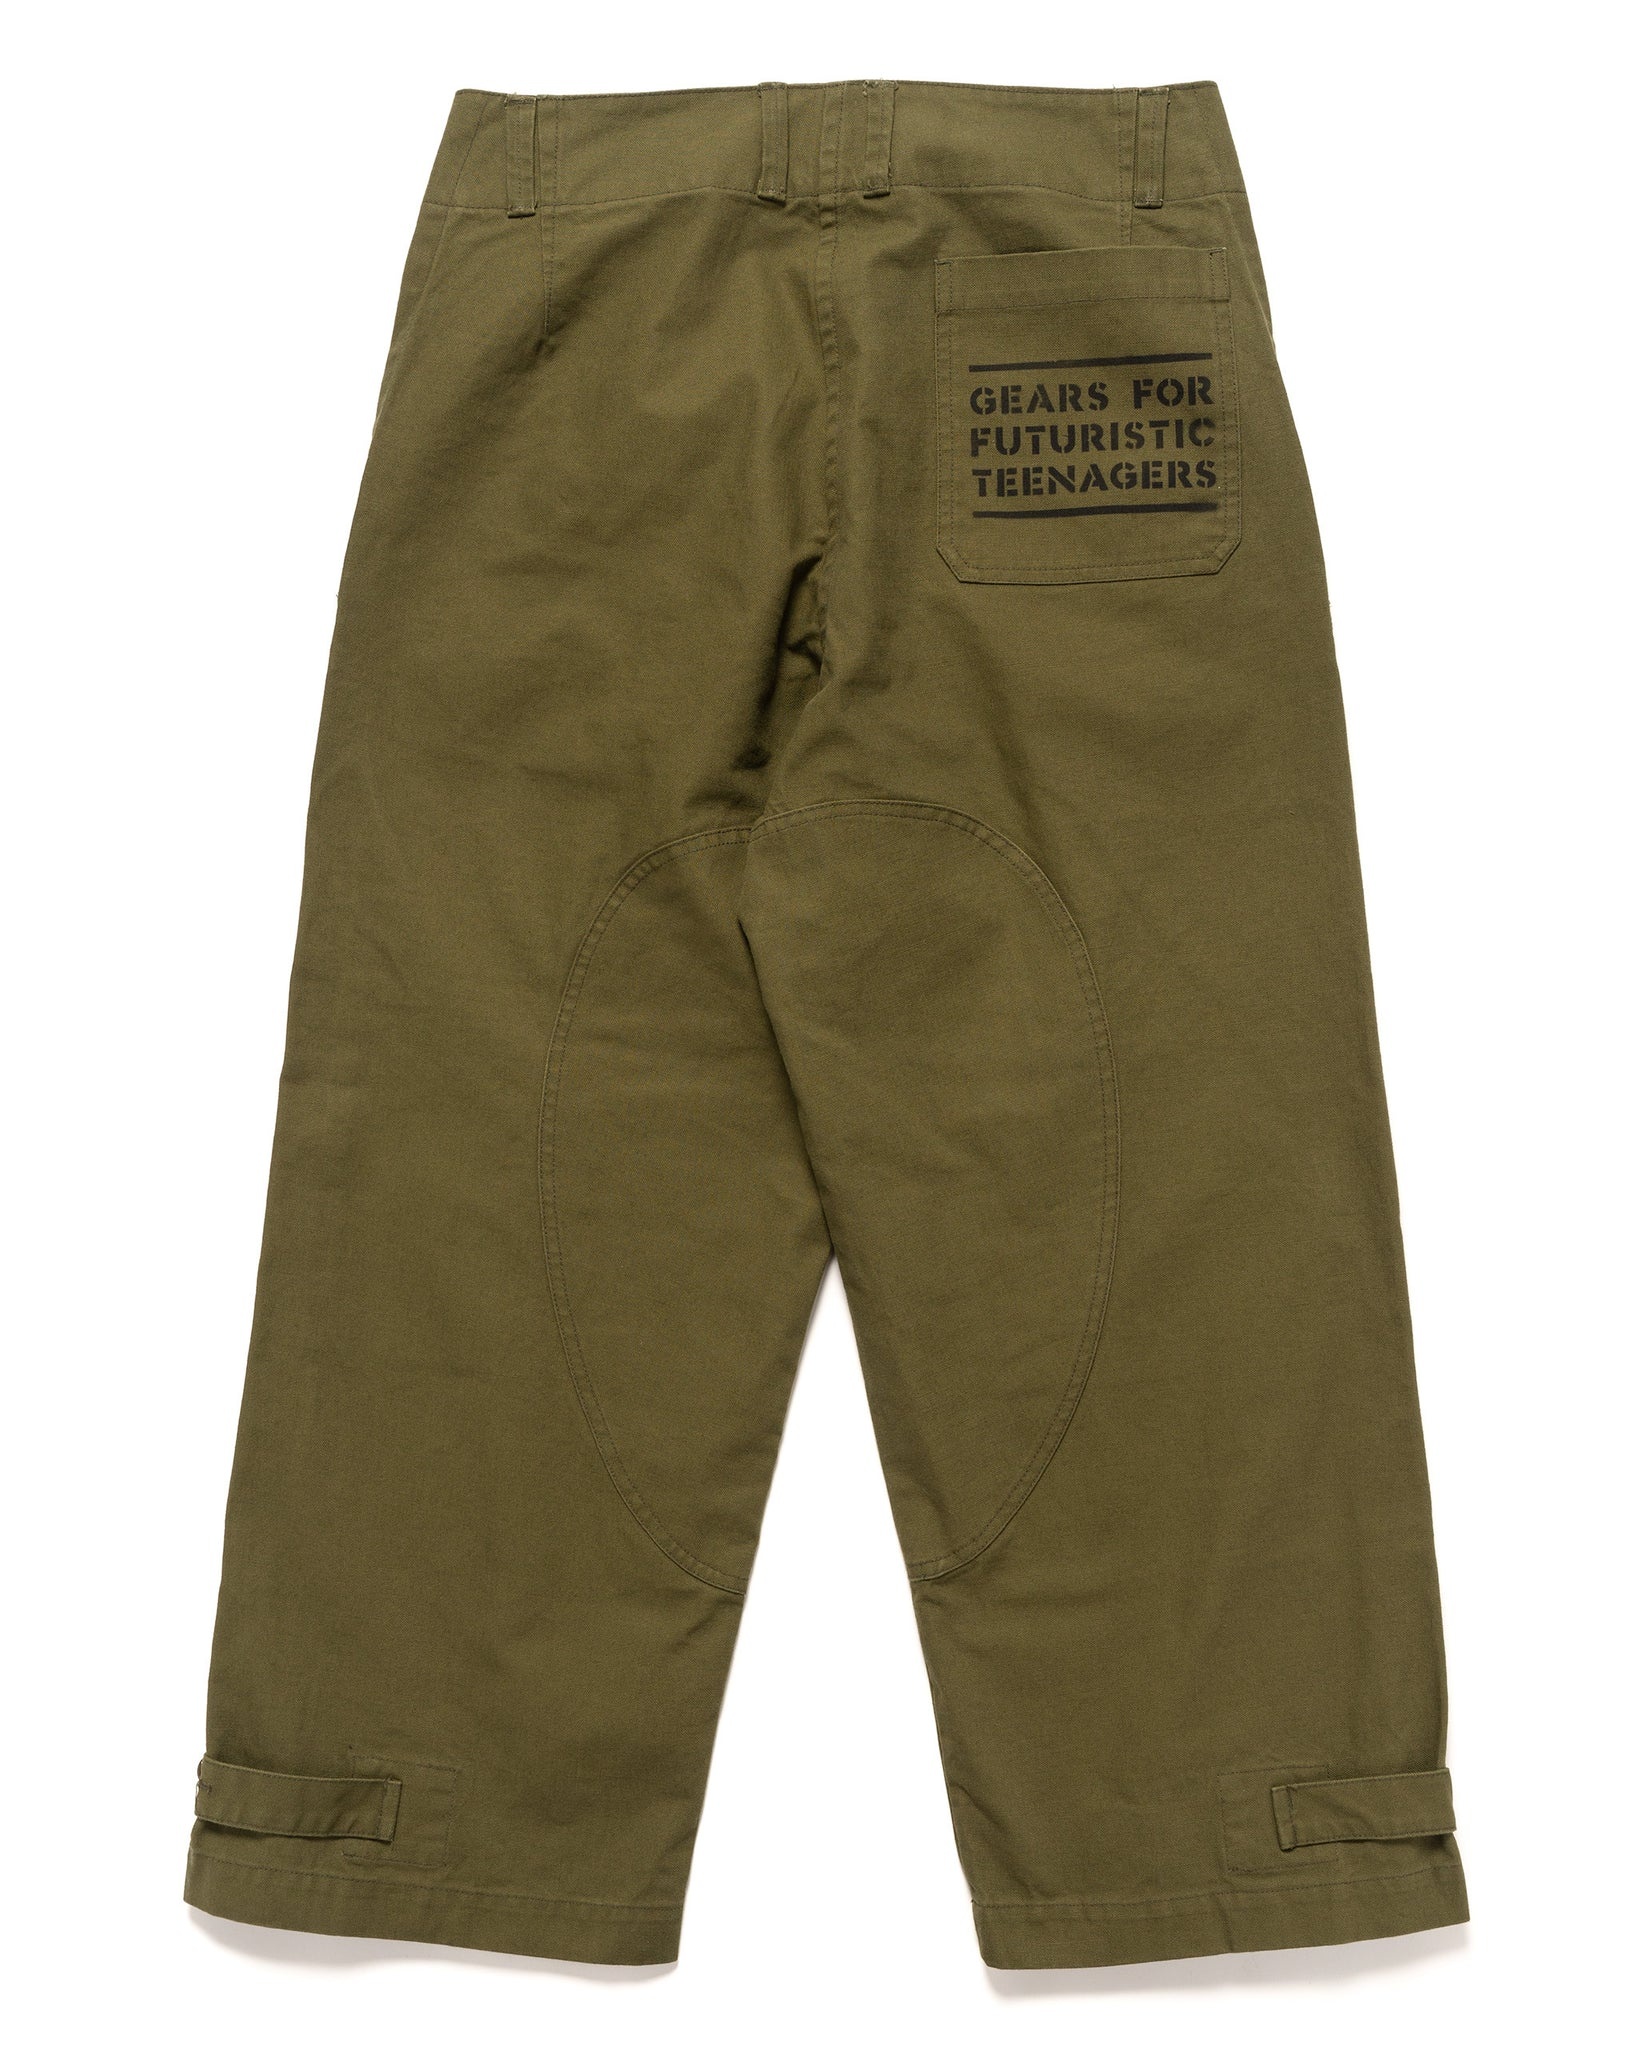 MILITARY MOTORCYCLE PANTS OLIVE DRAB - 5